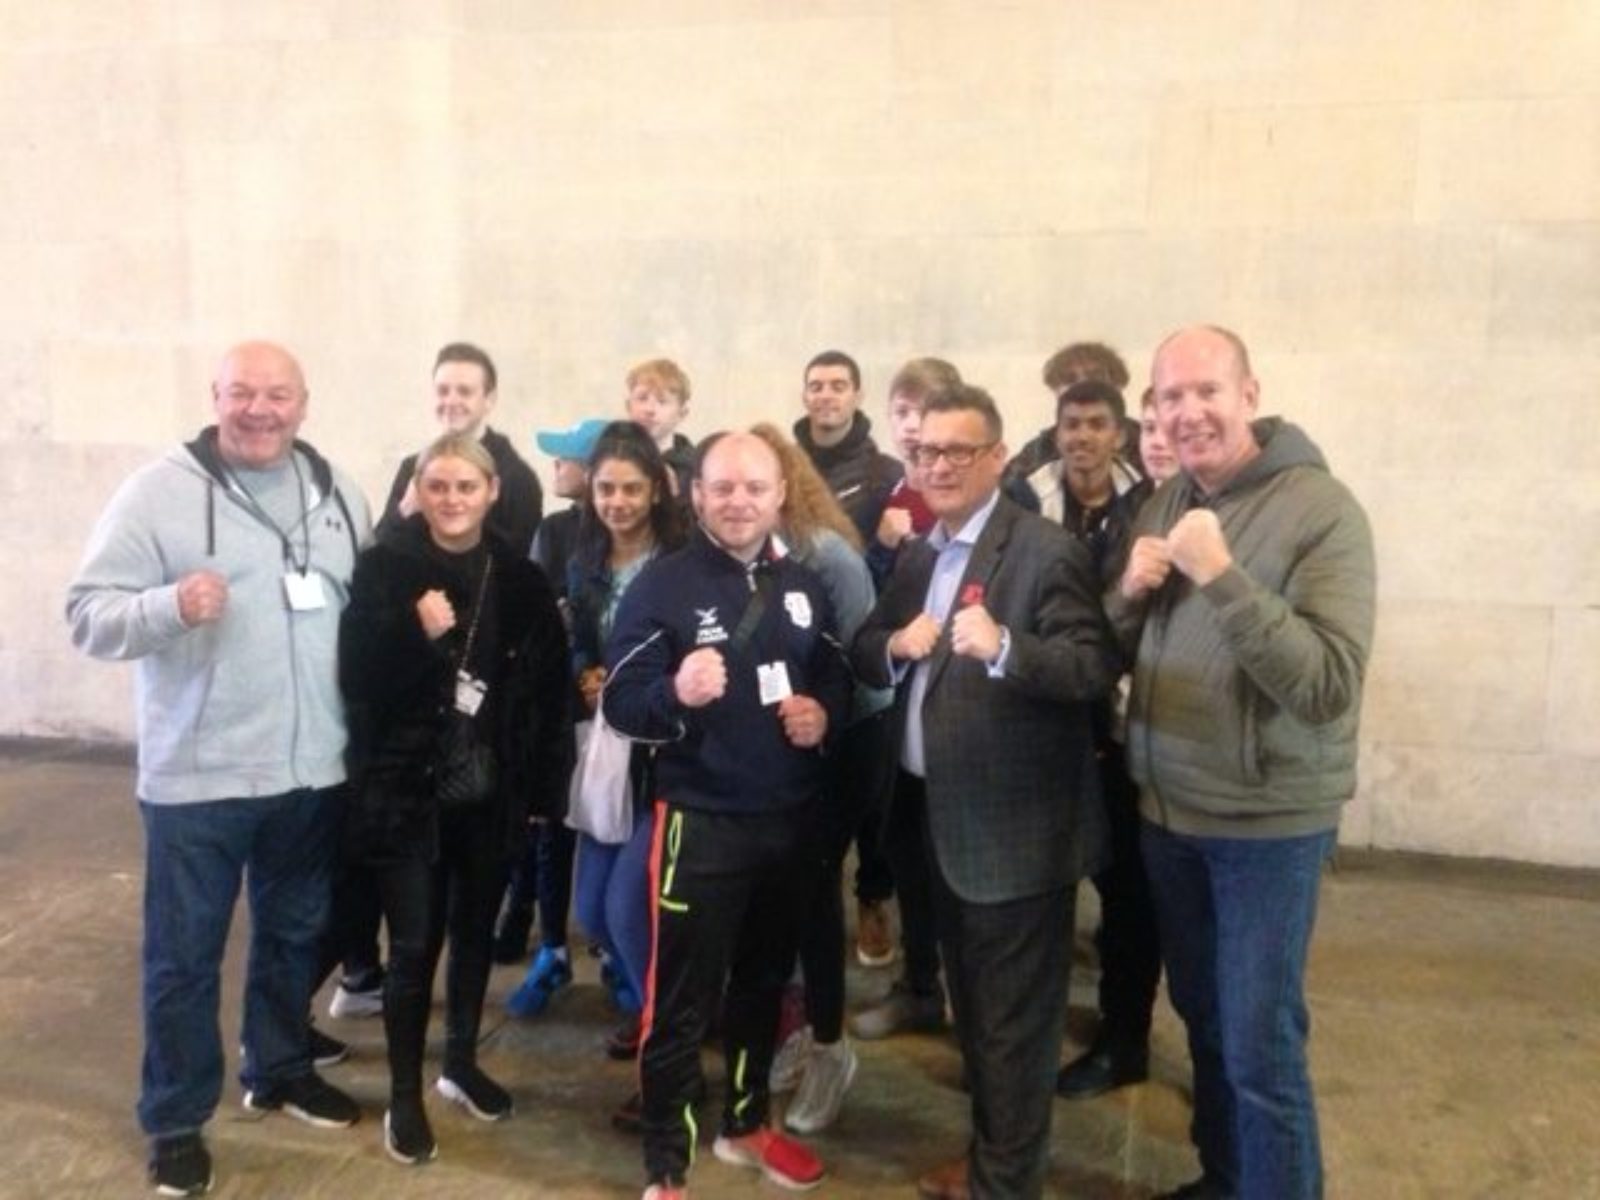 Young people from Surbiton and Kingston Upon Hull boxing clubs